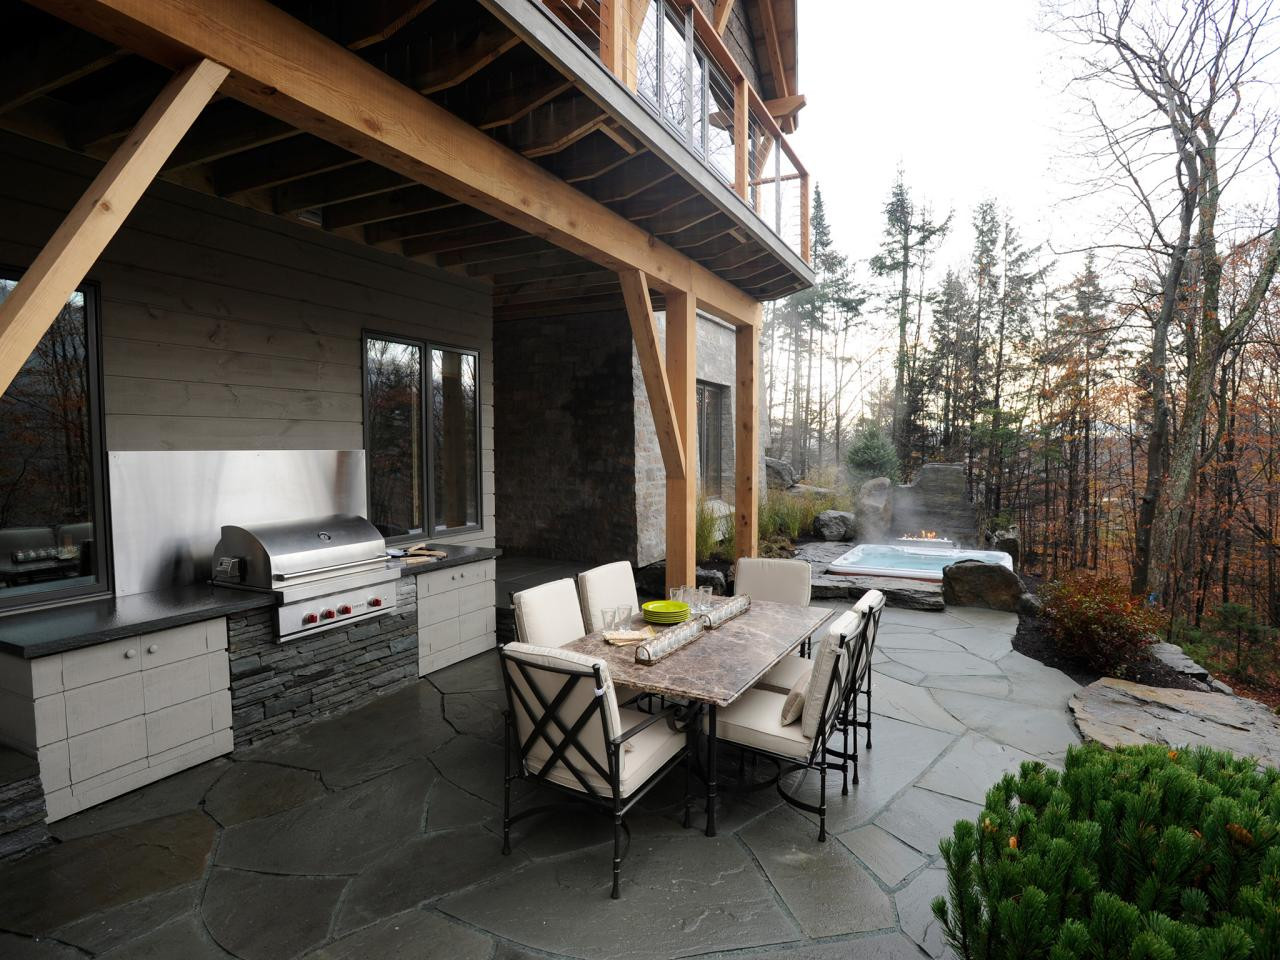 Outdoor Kitchen Under Deck
 50 Gorgeous Decks and Patios With Hot Tubs Interior